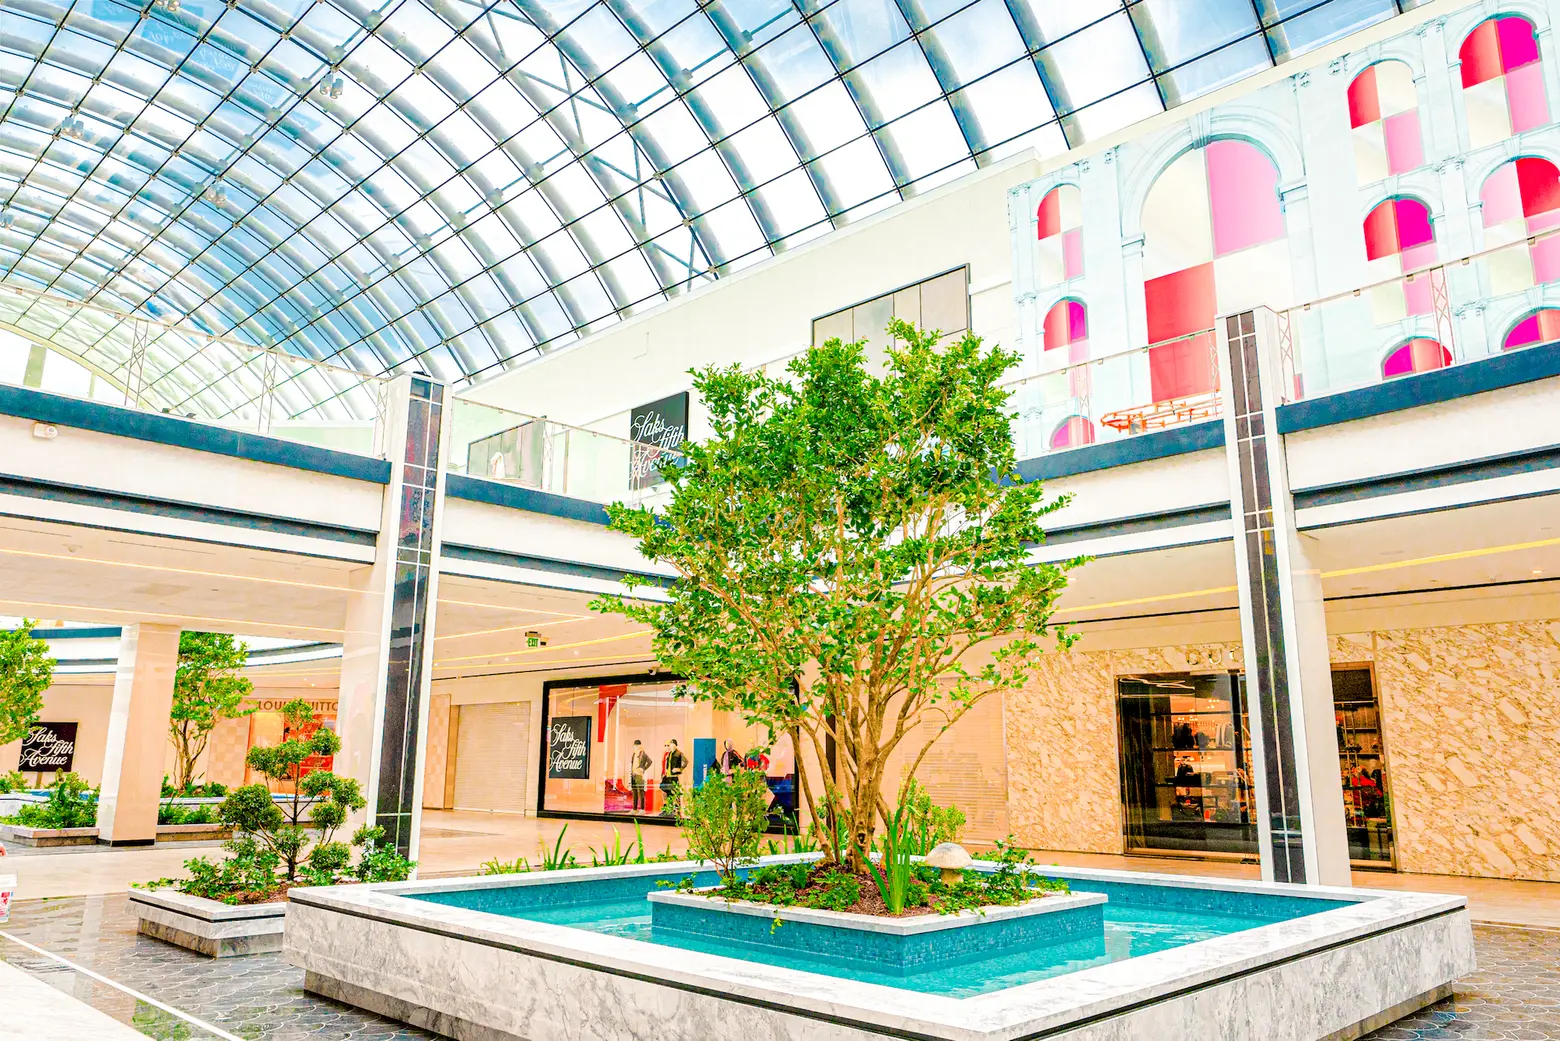 Garden State Plaza mall becomes home of art for the masses